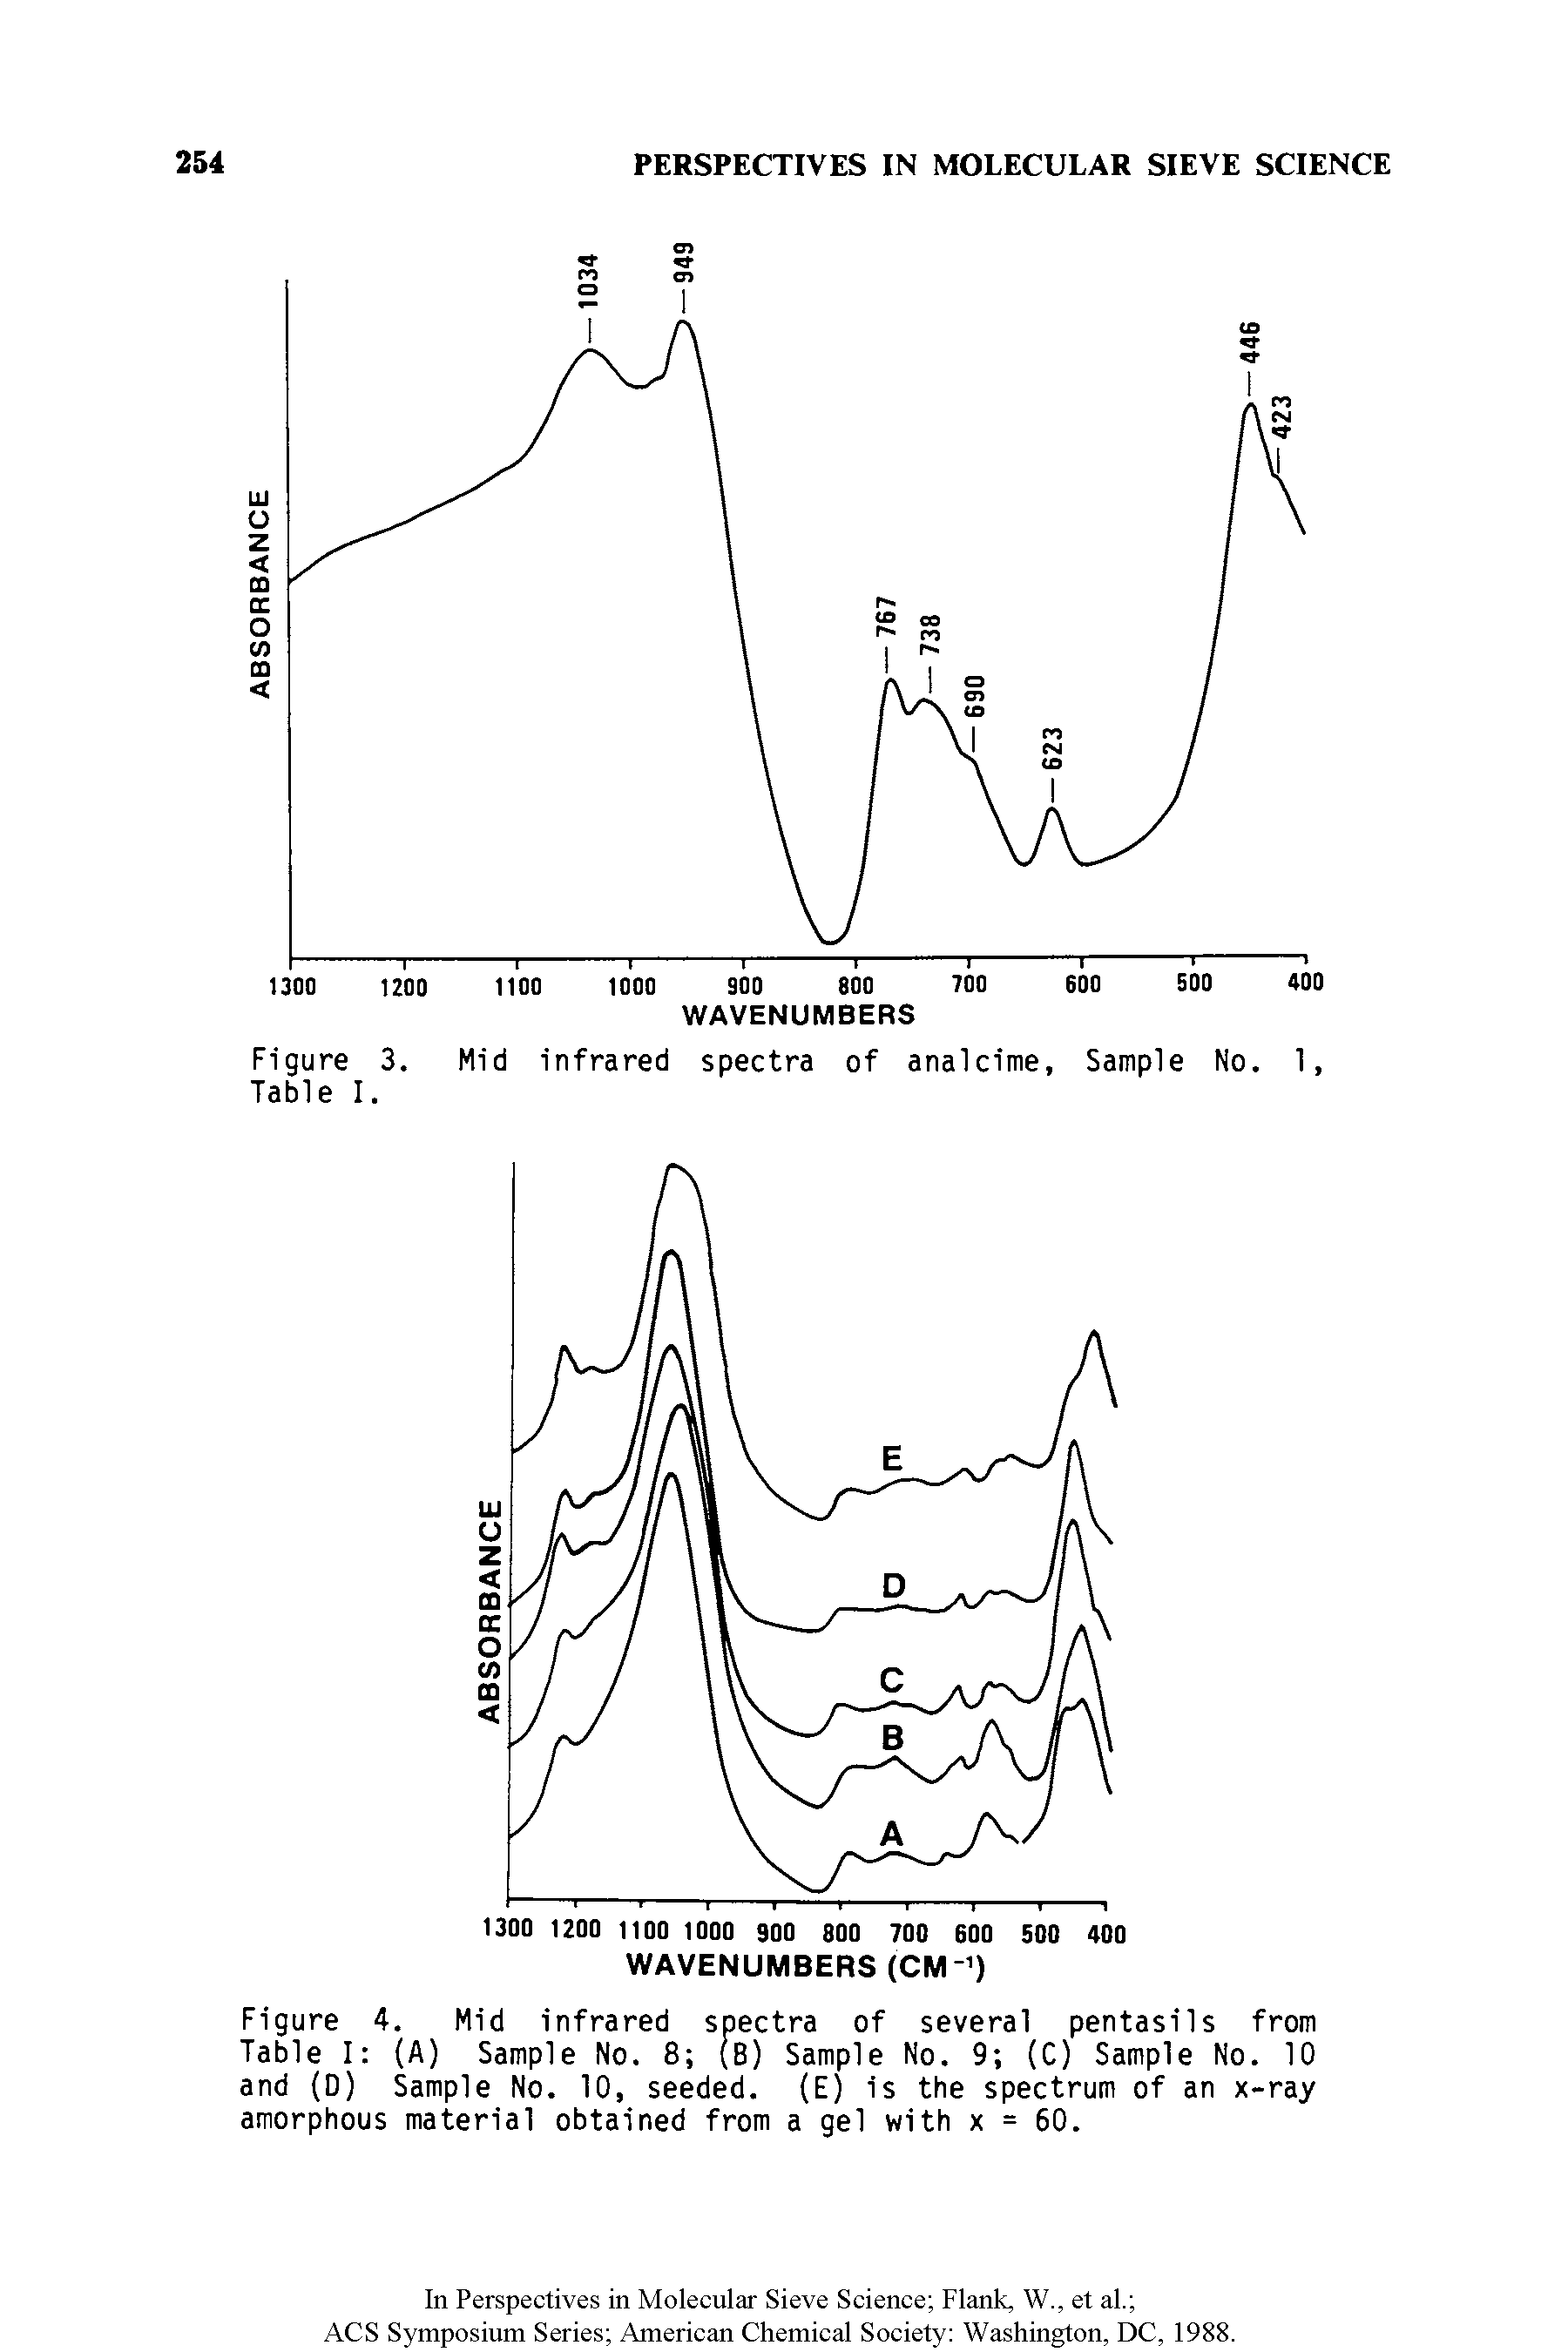 Figure 4. Mid infrared spectra of several pentasils from Table I (A) Sample No. 8 (B) Sample No. 9 (C) Sample No. 10 and (D) Sample No. 10, seeded. (E) is the spectrum of an x-ray amorphous material obtained from a gel with x = 60.